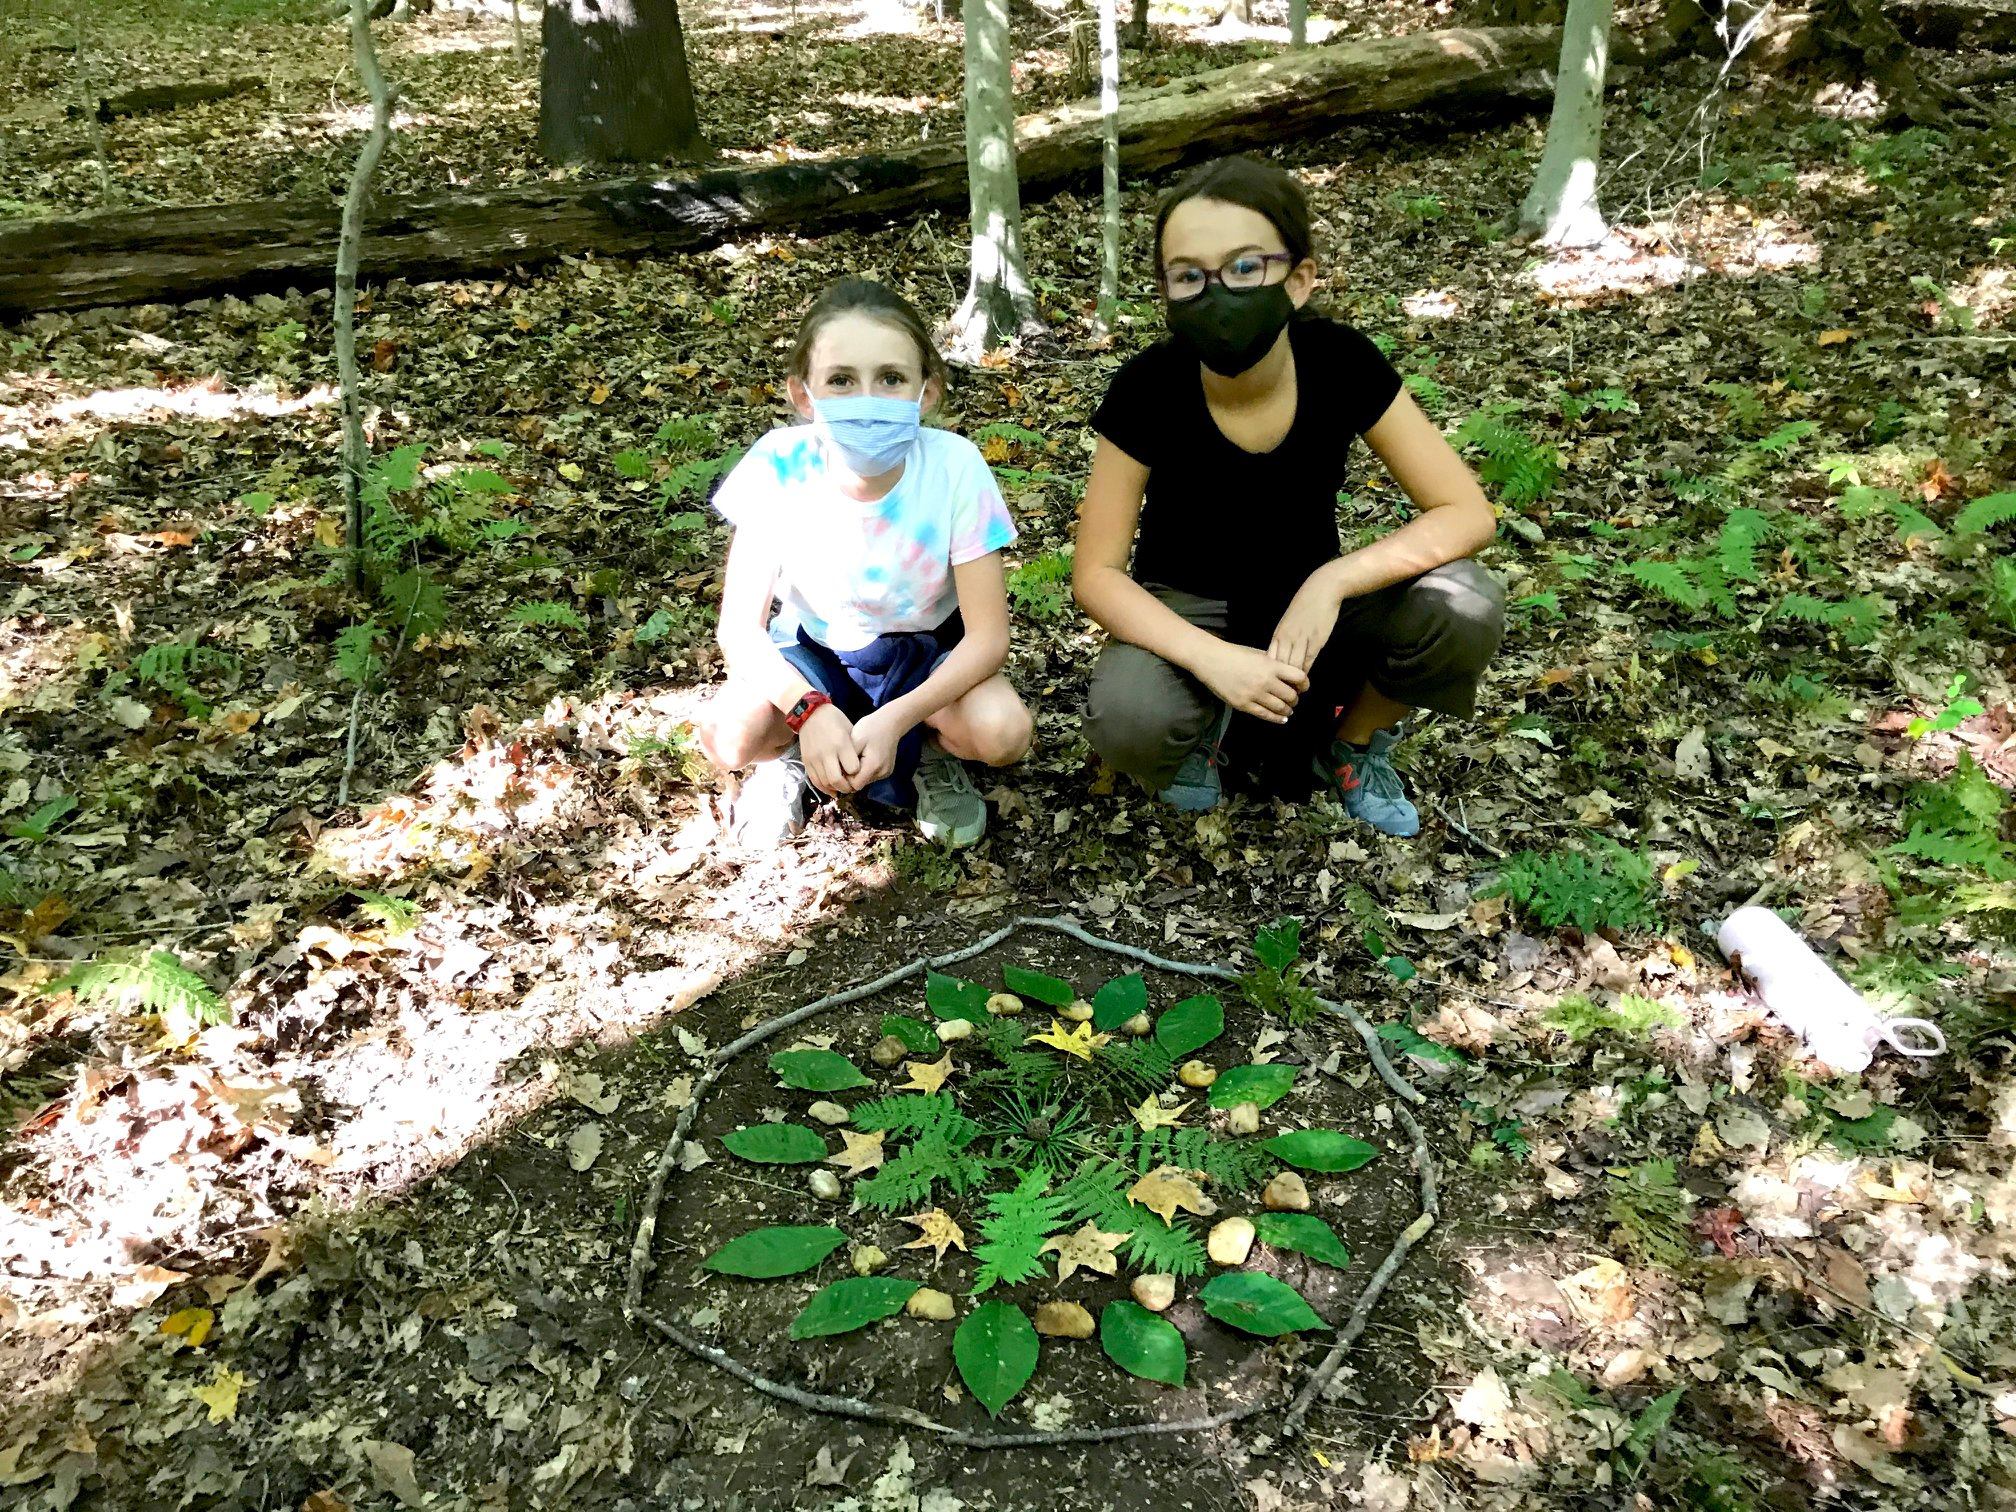 Our fourth graders learned about British sculptor Andy Goldsworthy and created their own art in nature. An accomplished artist, Mr. Goldsworthy creates temporary landscape art installations involving natural materials that reflect the passage of time.